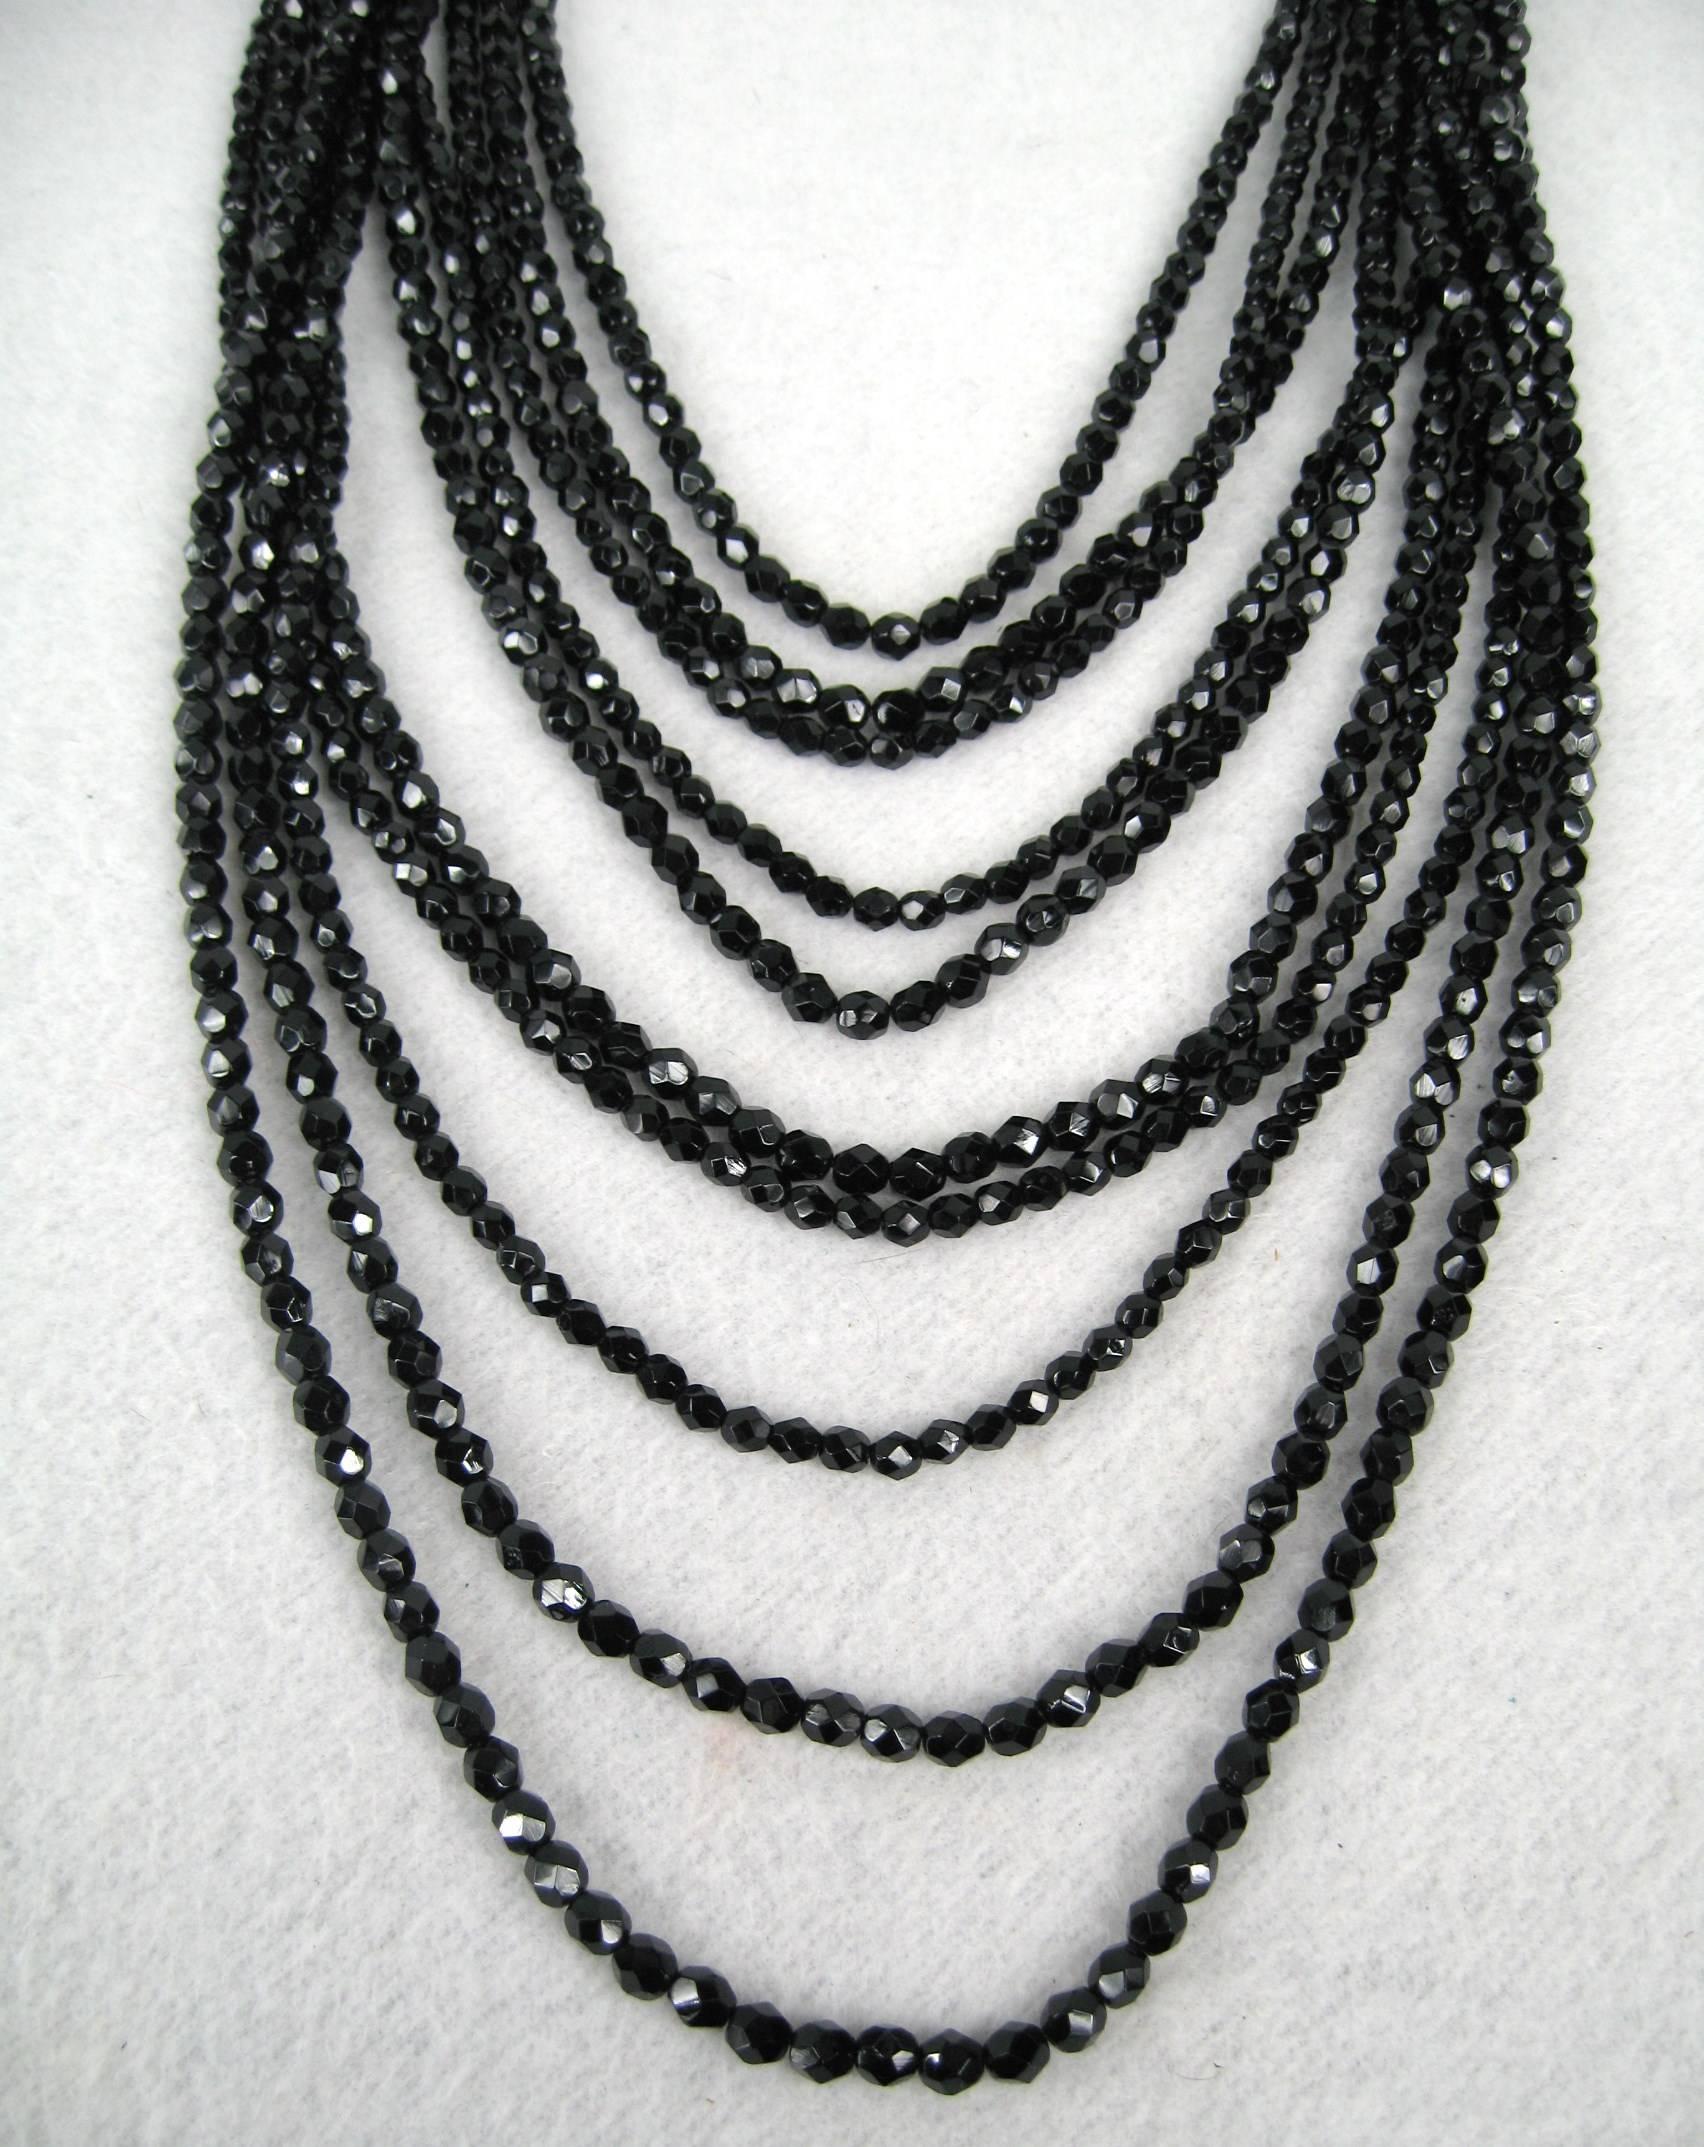 This is an exquisite piece
11 strands of faceted glass Beads
Draping from 13